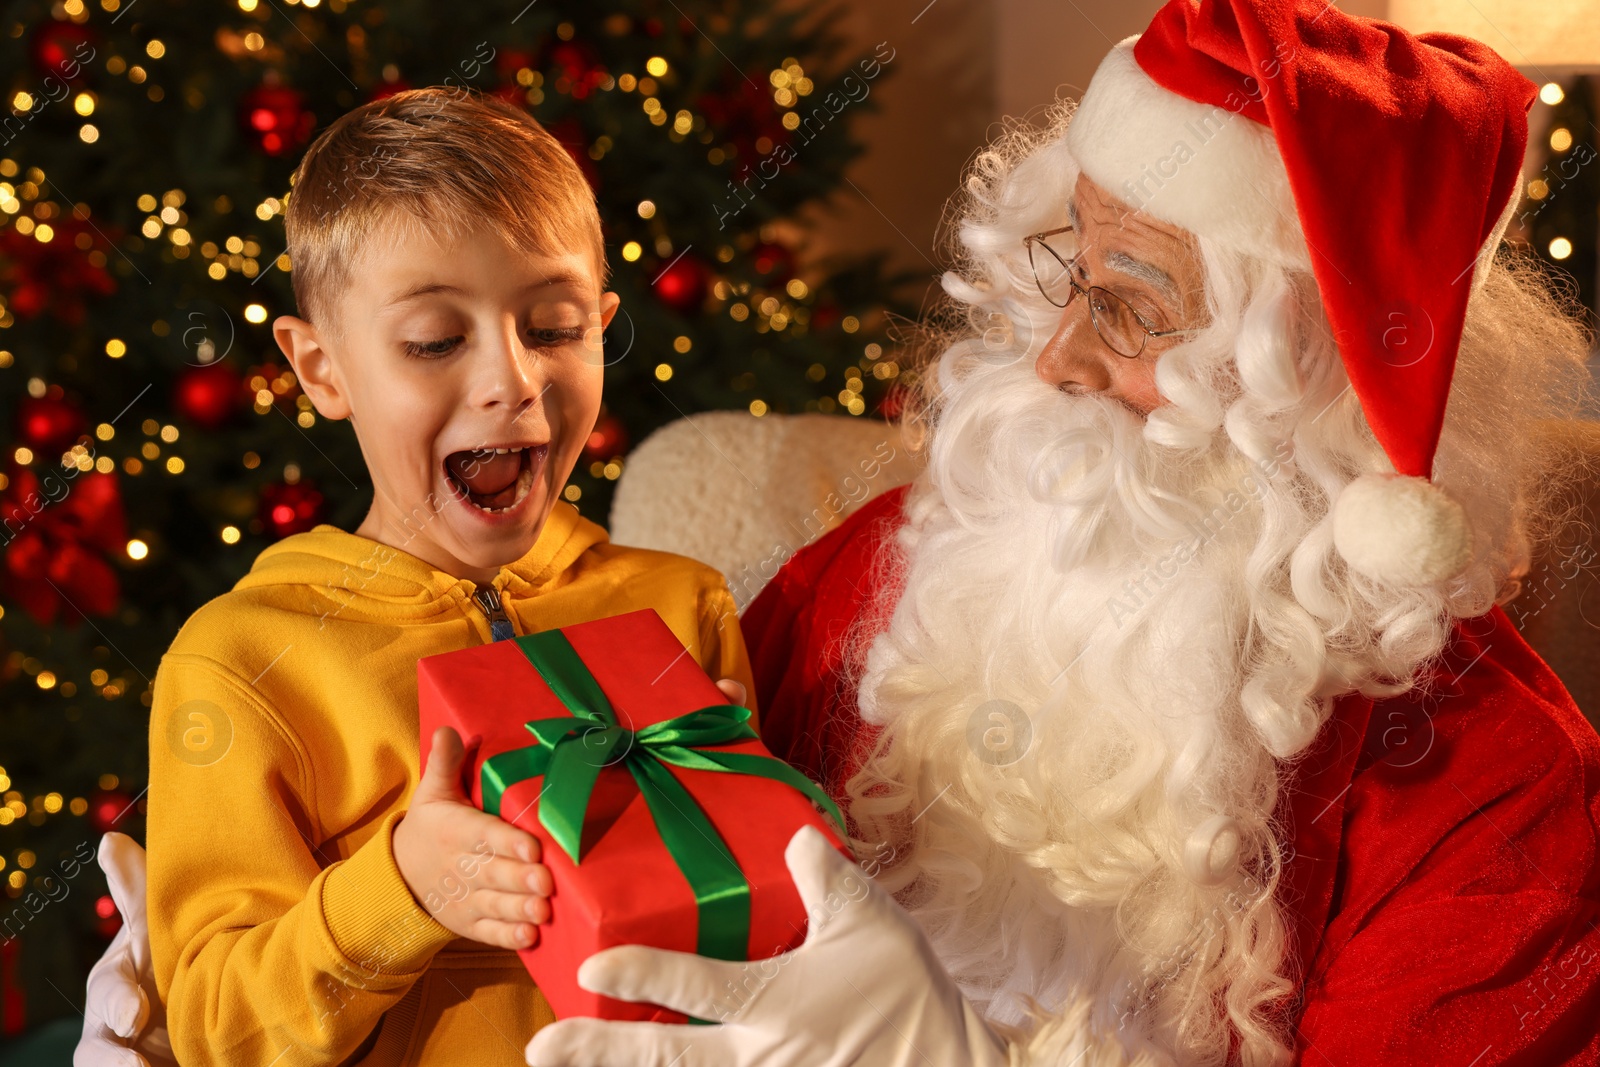 Photo of Surprised little boy taking gift from Santa Claus in room with Christmas tree